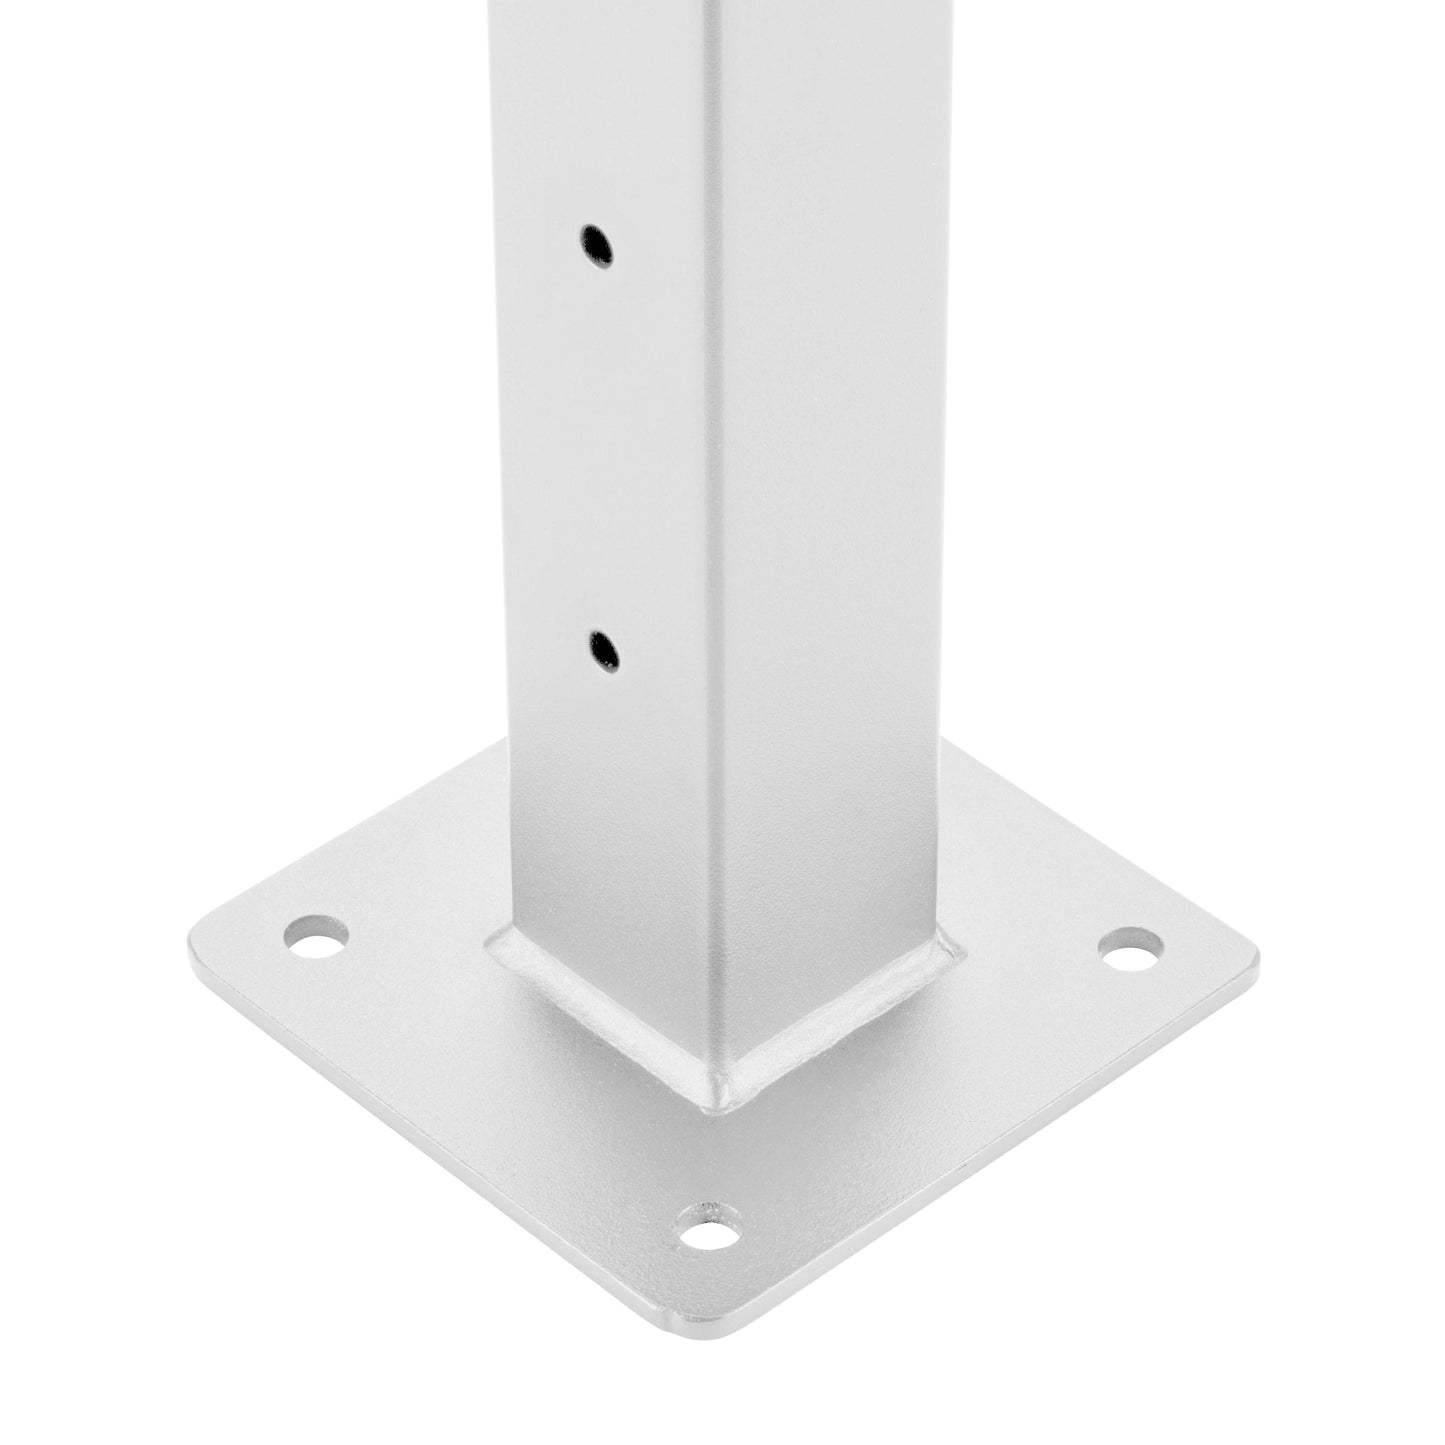 71 ft. x 42 in. White Deck Cable Railing, Base Mount